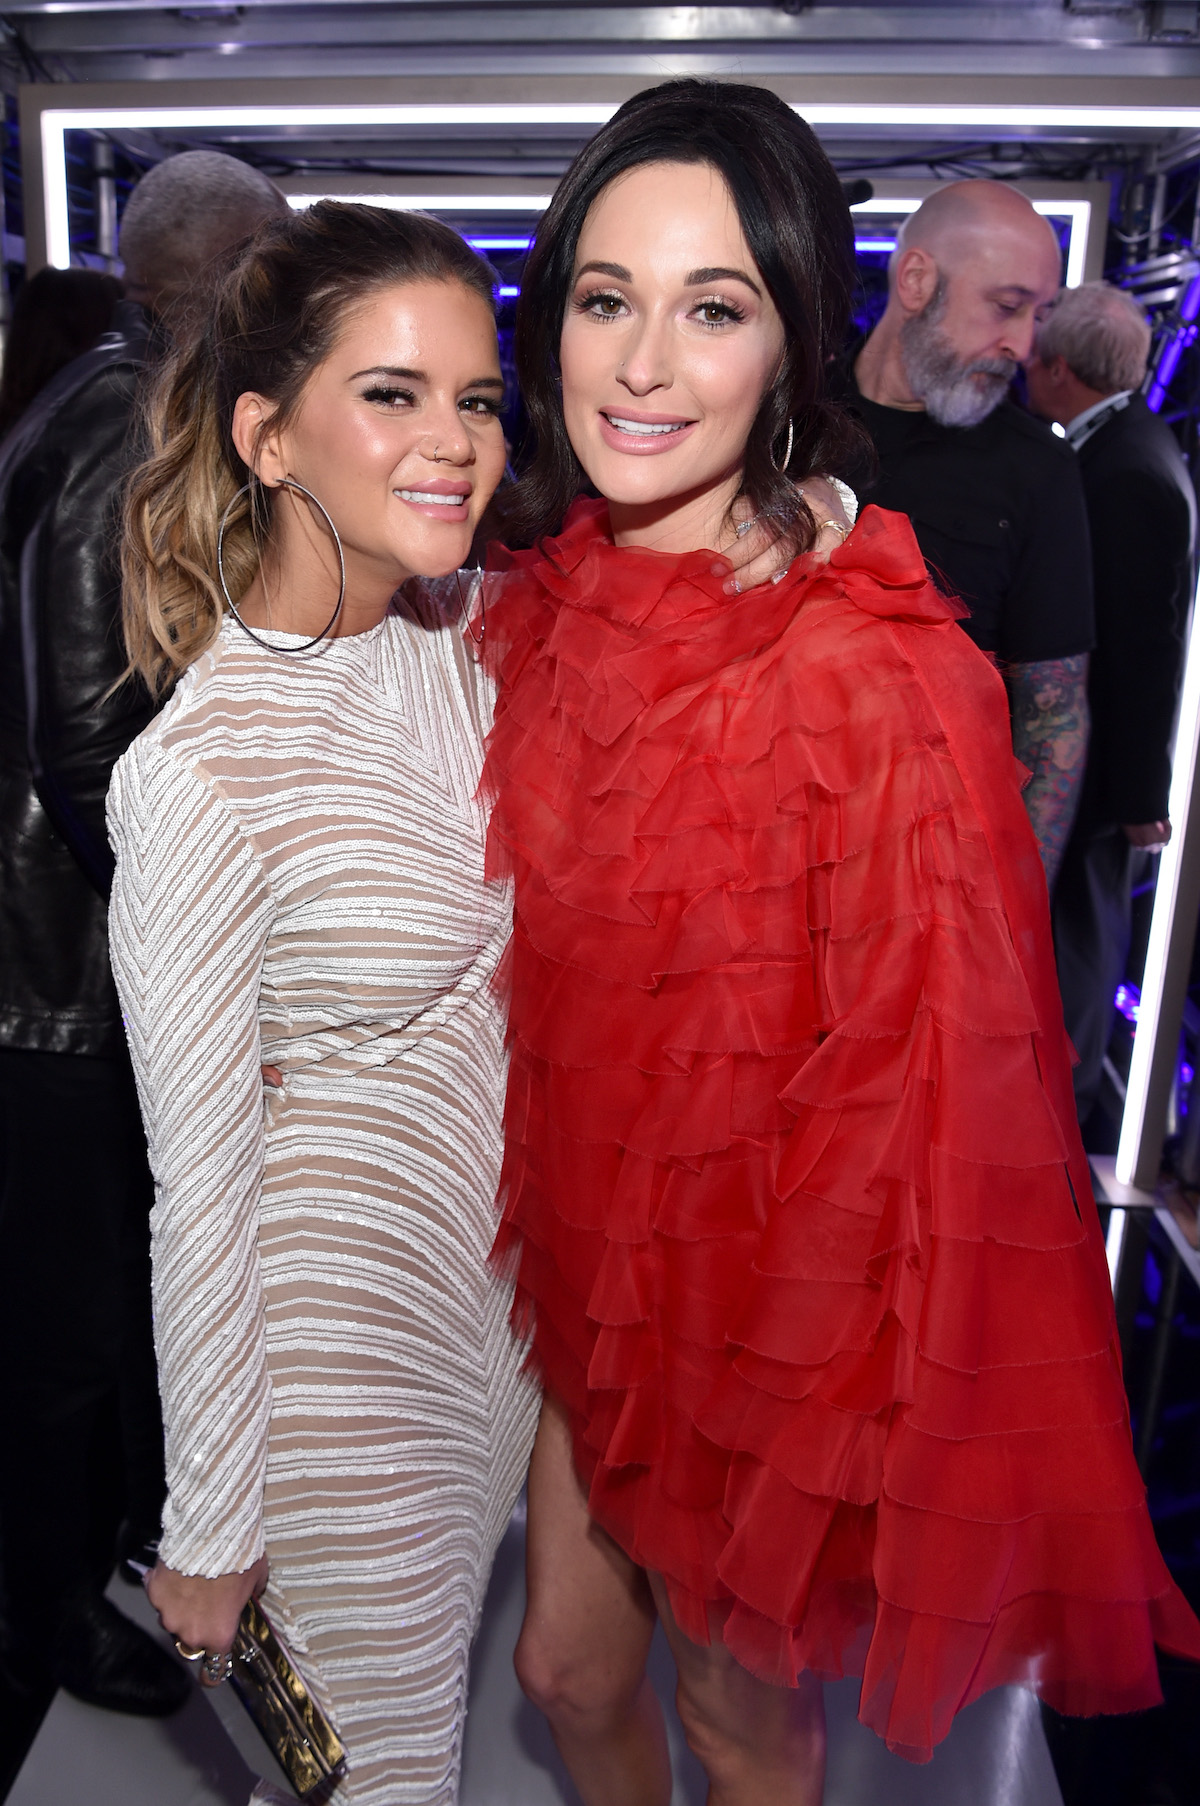 Maren Morris and Kacey Musgraves backstage during the 61st Annual GRAMMY Awards in 2019